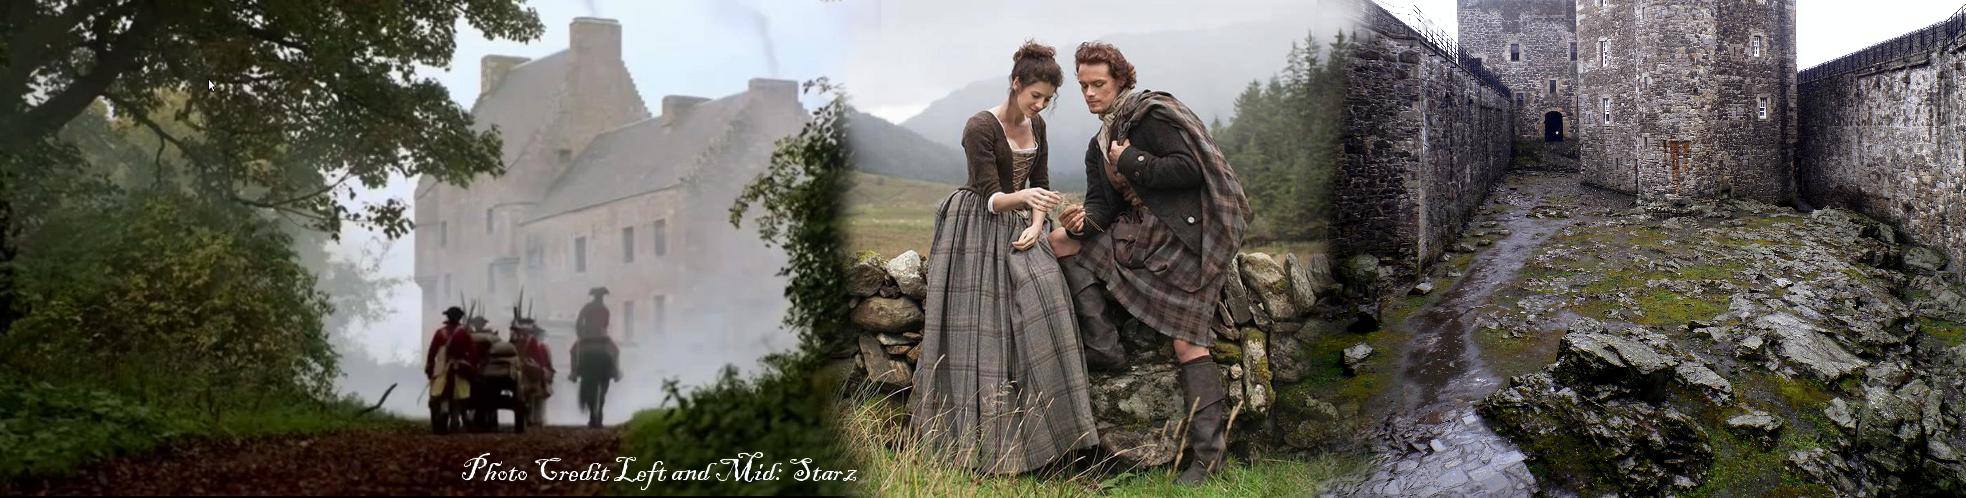 Outlander TV Tours of Starz filming locations in Scotland